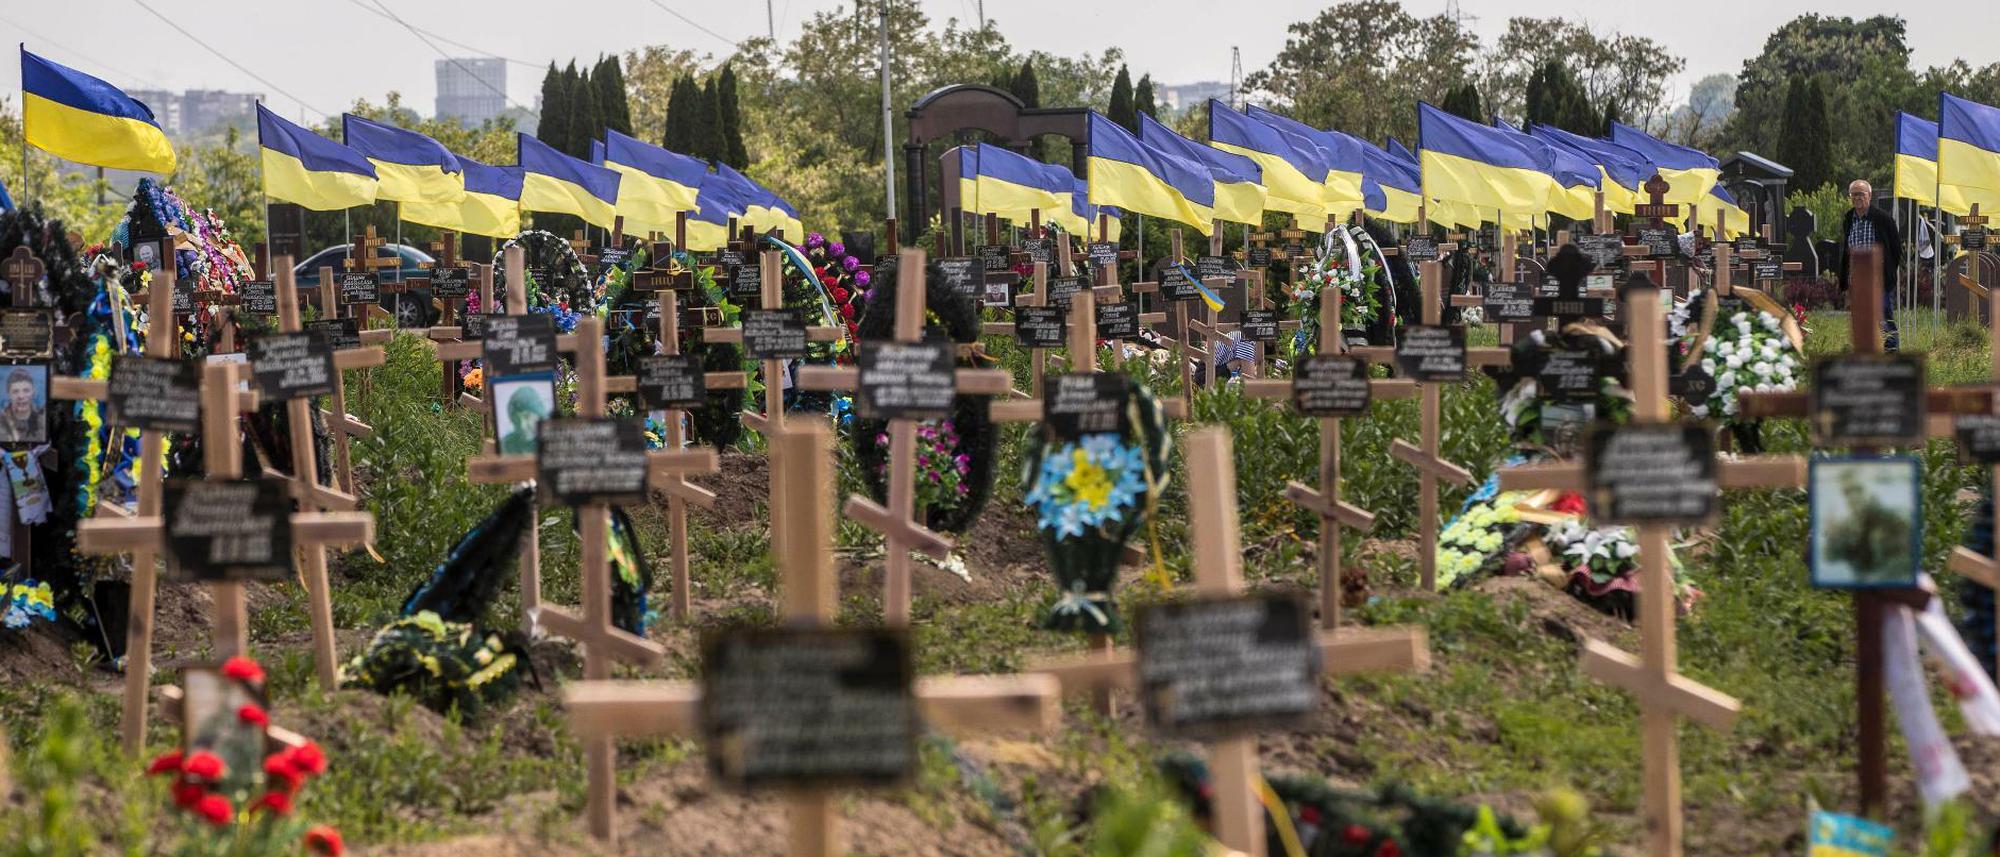 news-bilder-des-tages-view-of-crosses-in-the-sector-of-ukrainian-soldiers-killed-in-the-war-with-rus.jpg